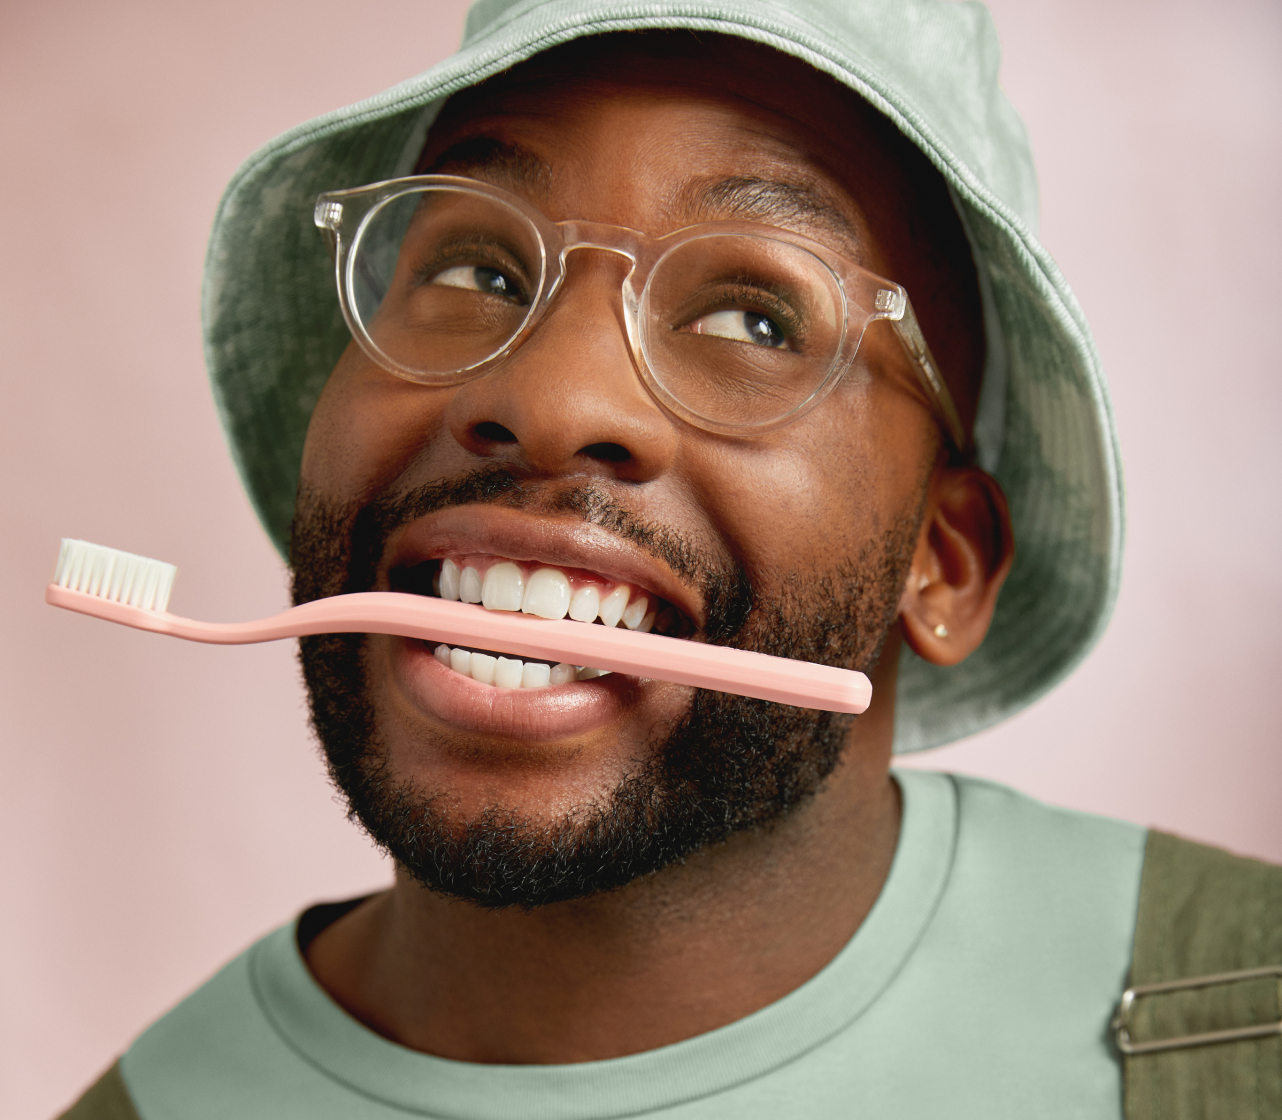 Man in hat smiling and looking upward with toothbrush handle being held by his teeth